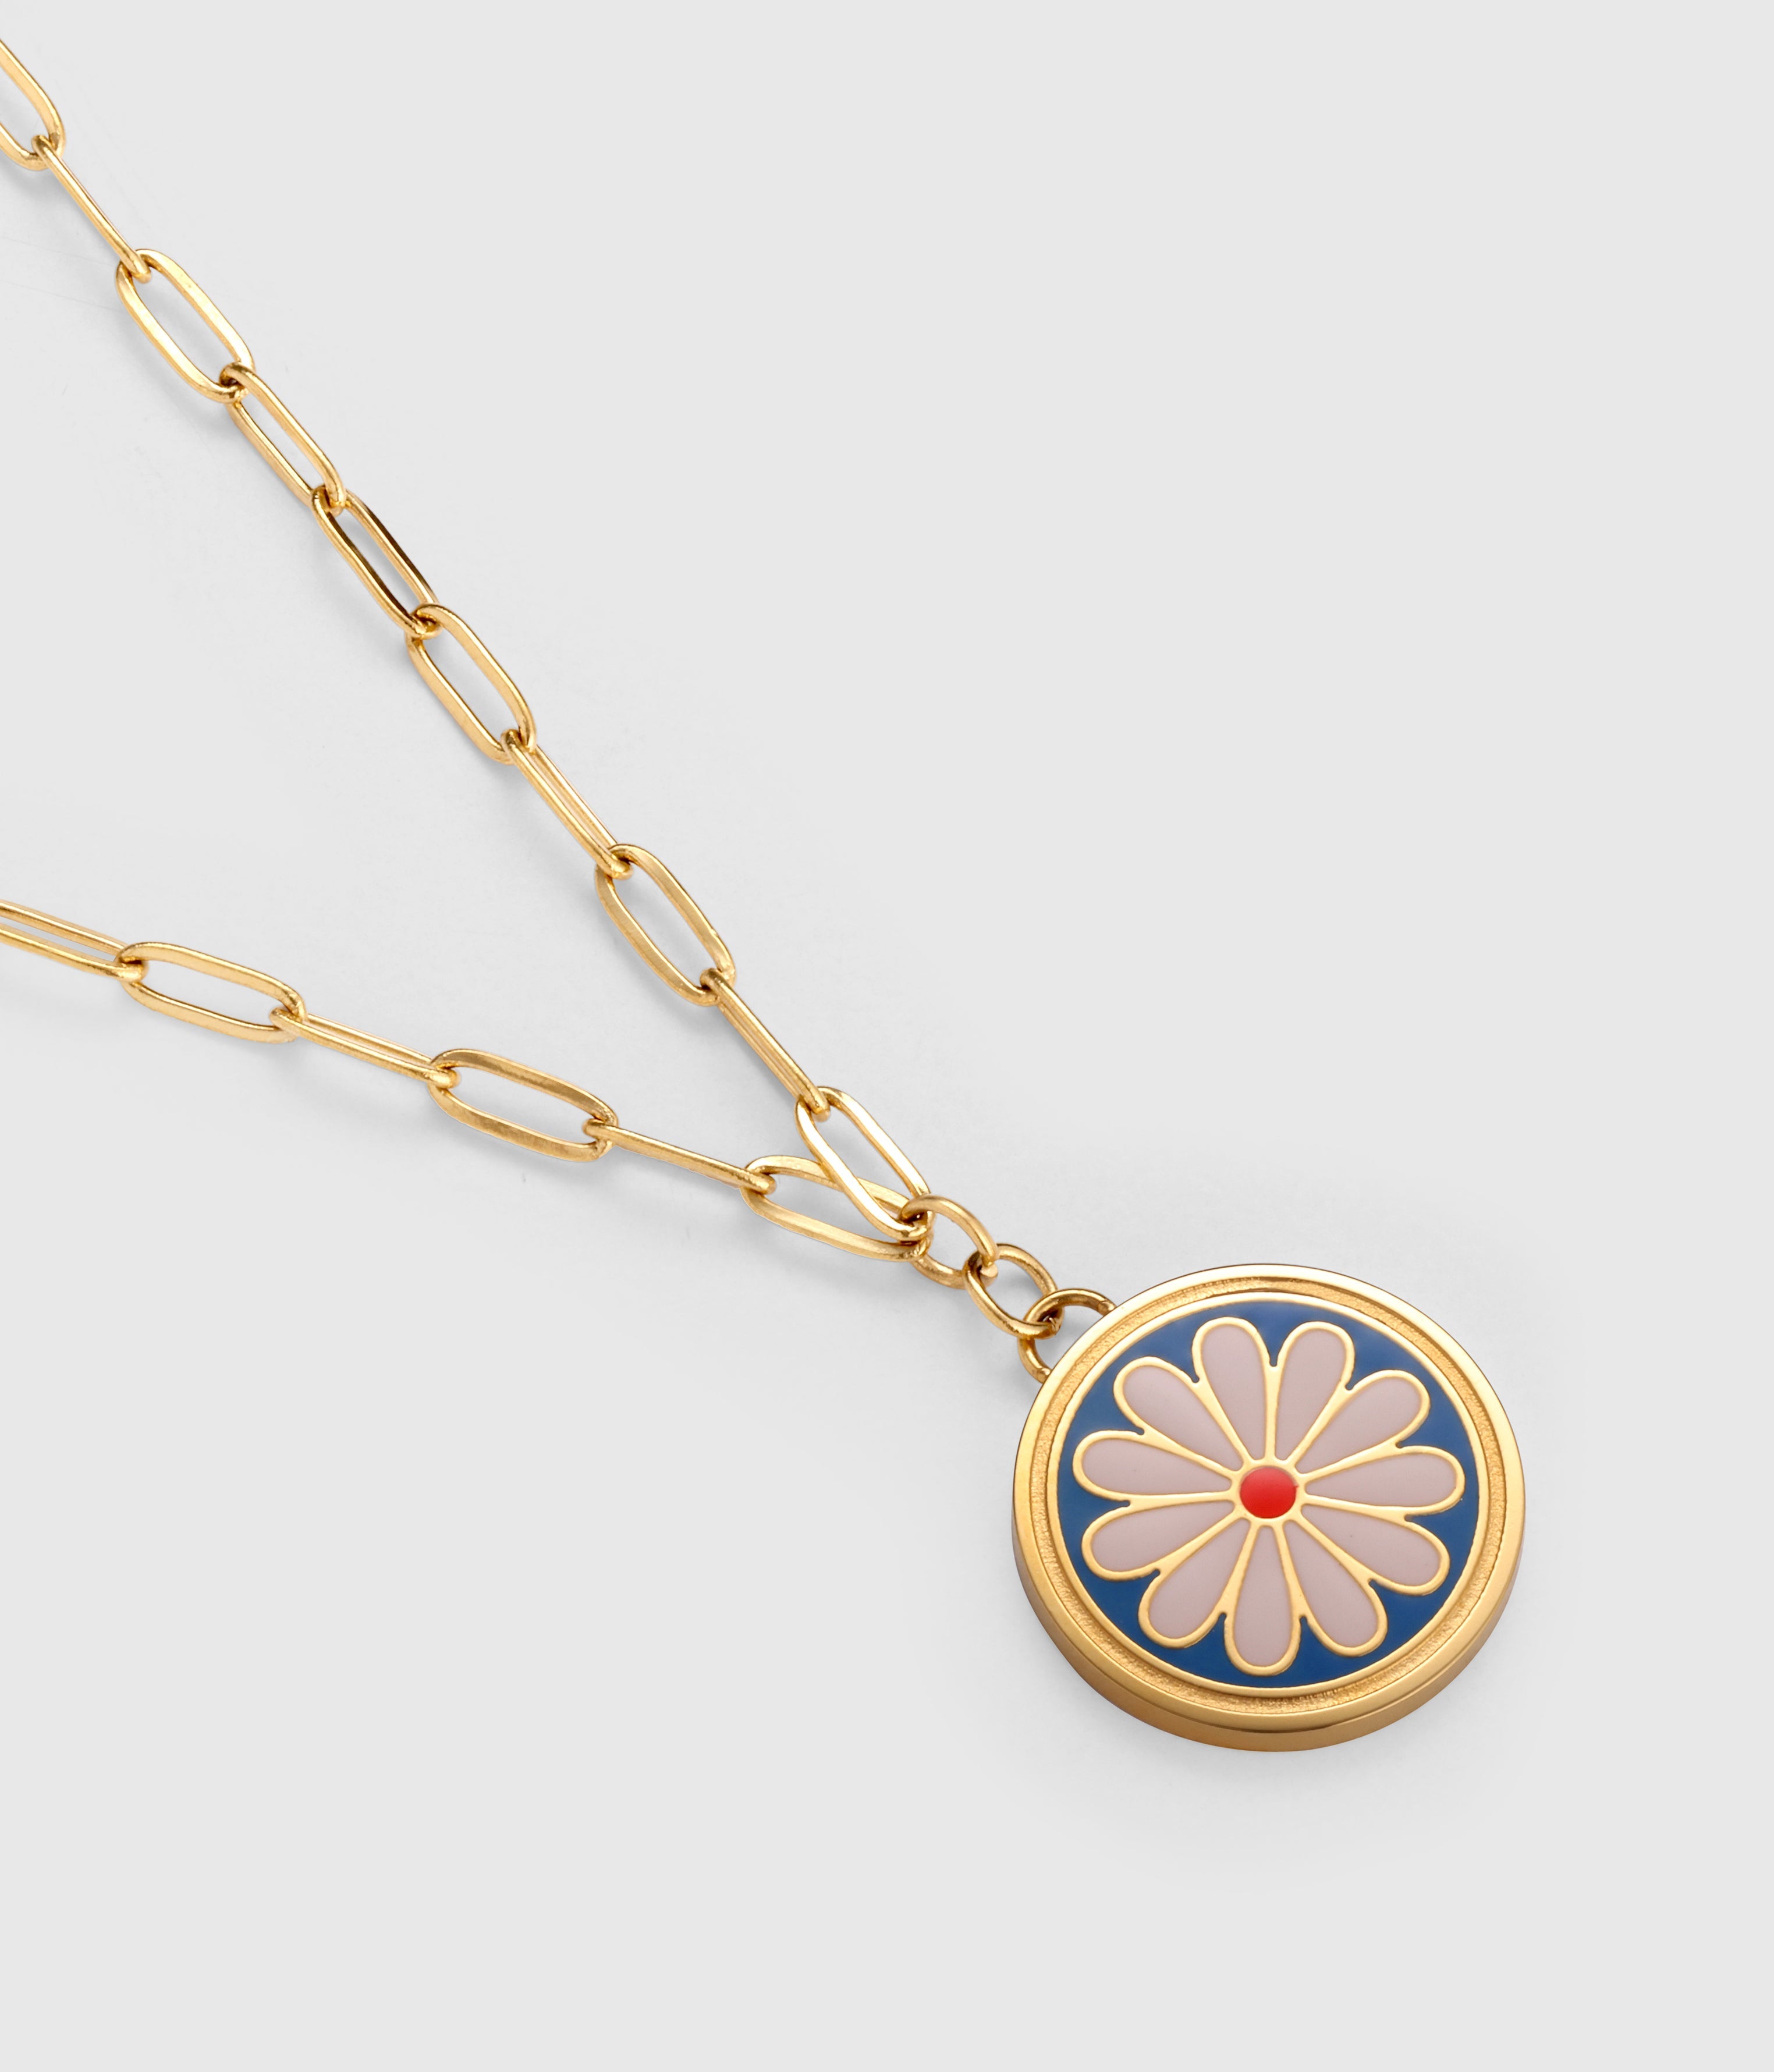 Dainty Daisy Necklace, Pressed Daisy Flower Necklace, White Flower Necklace,  Bridal Shower Gift Ideas, Flower Girl Jewelry, Bridesmaid Gifts - Etsy